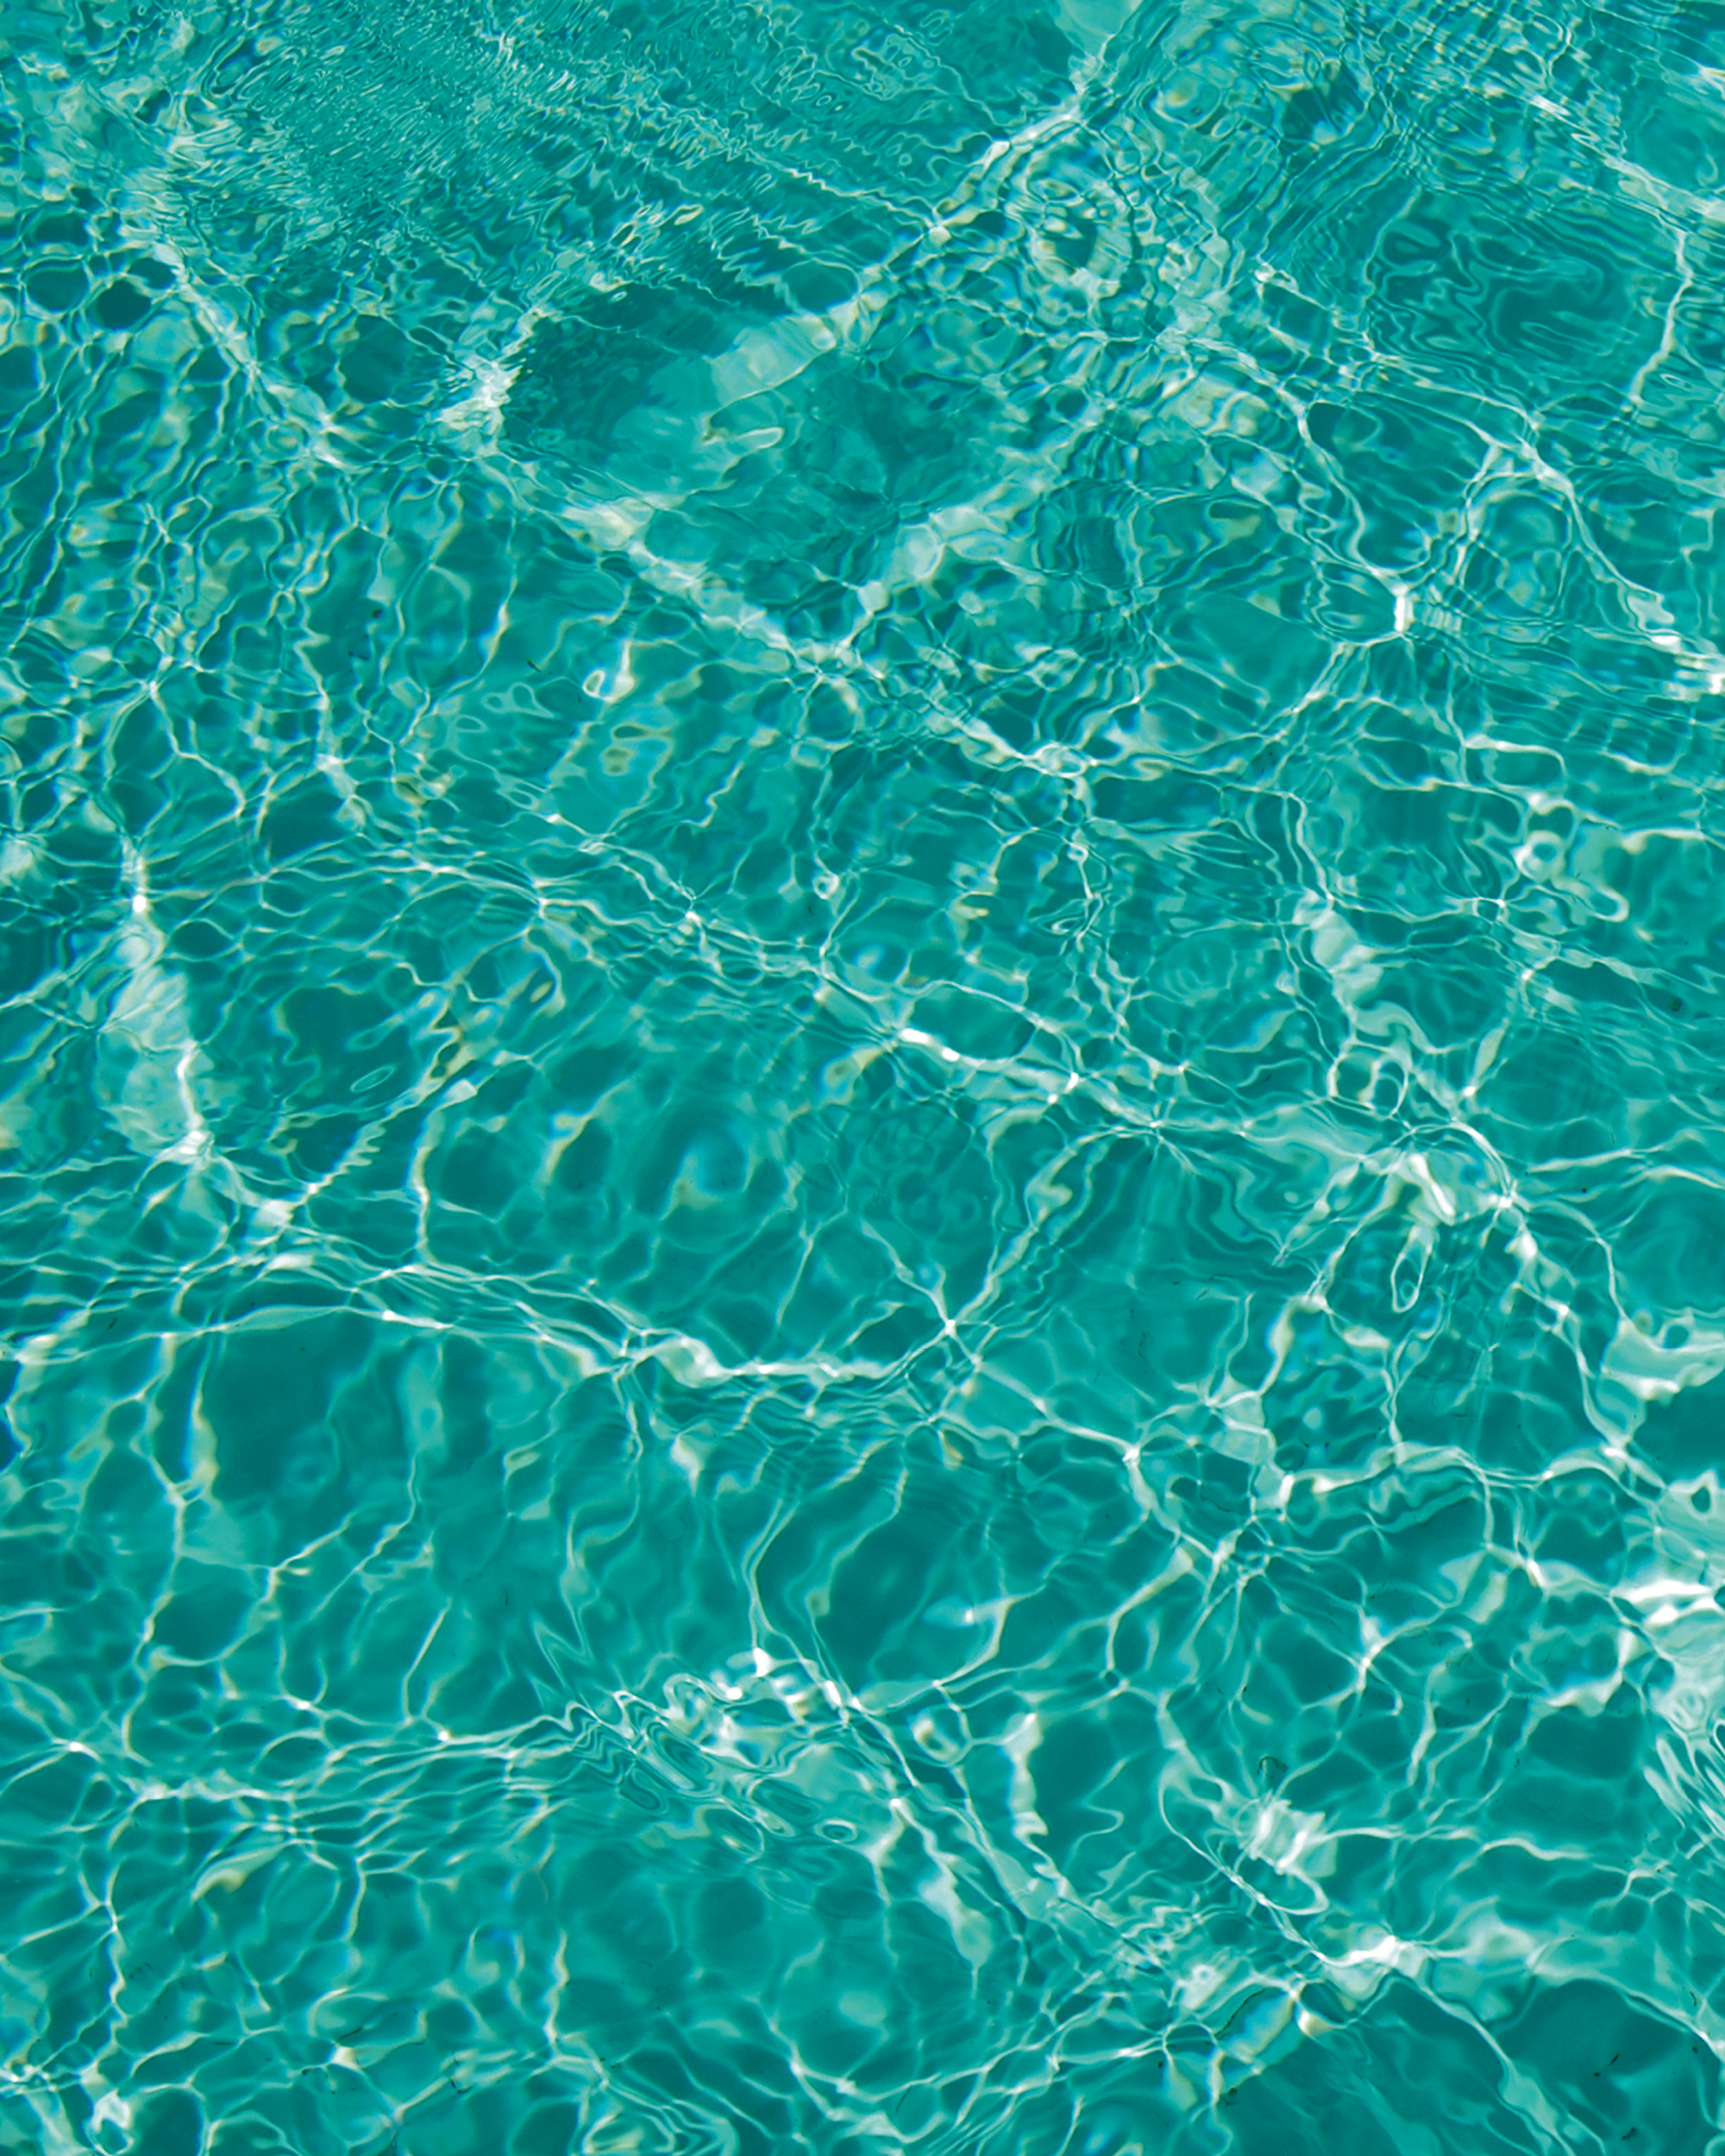 An abstract twenty twelve photograph of turquoise water by Misha Kahn.